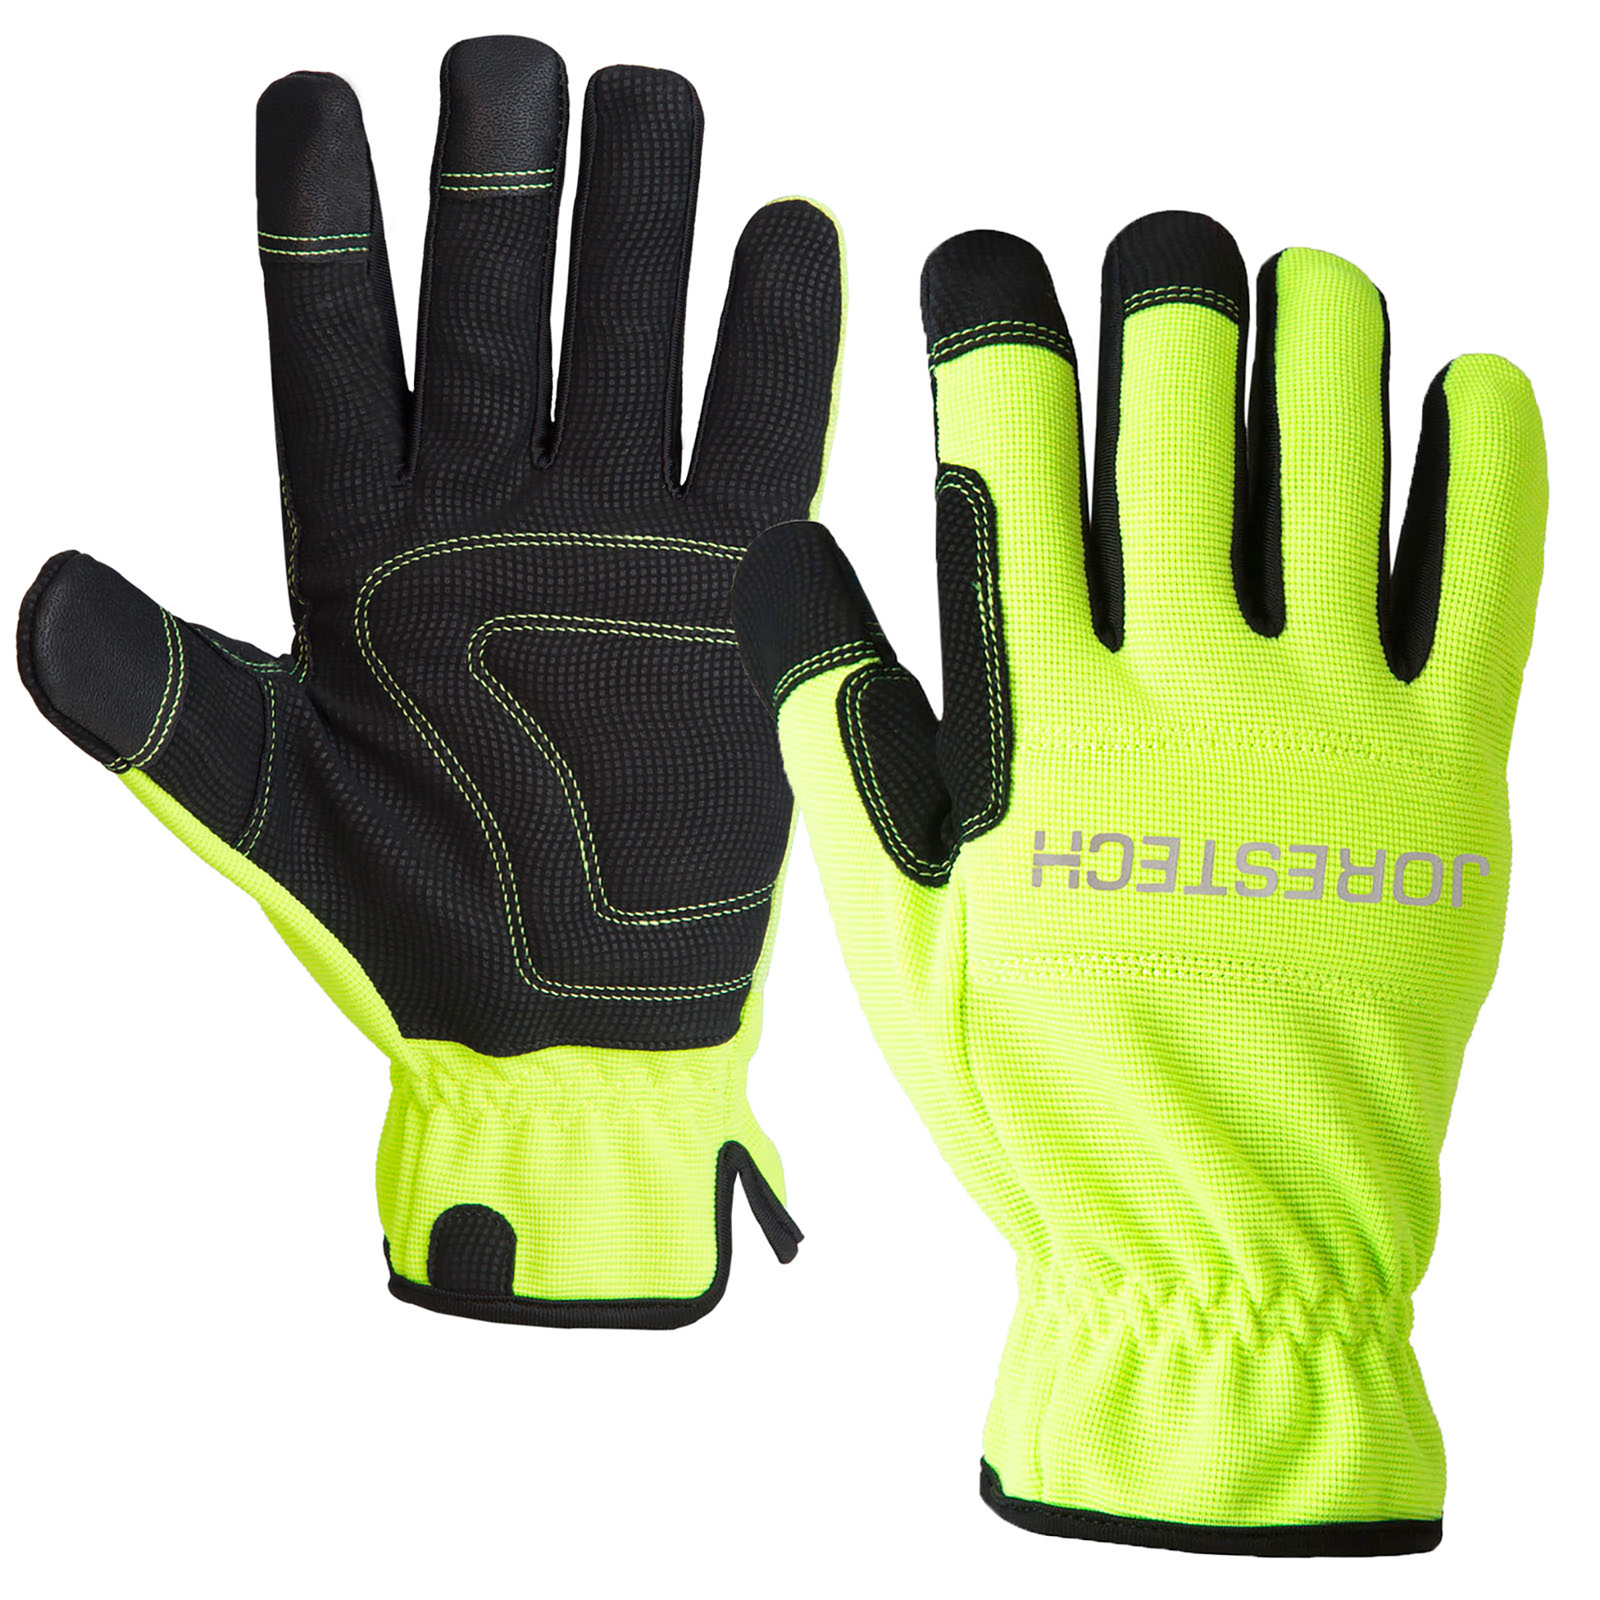 One pair of hi-vis yellow and black touchscreen JORESTECH® safety work gloves